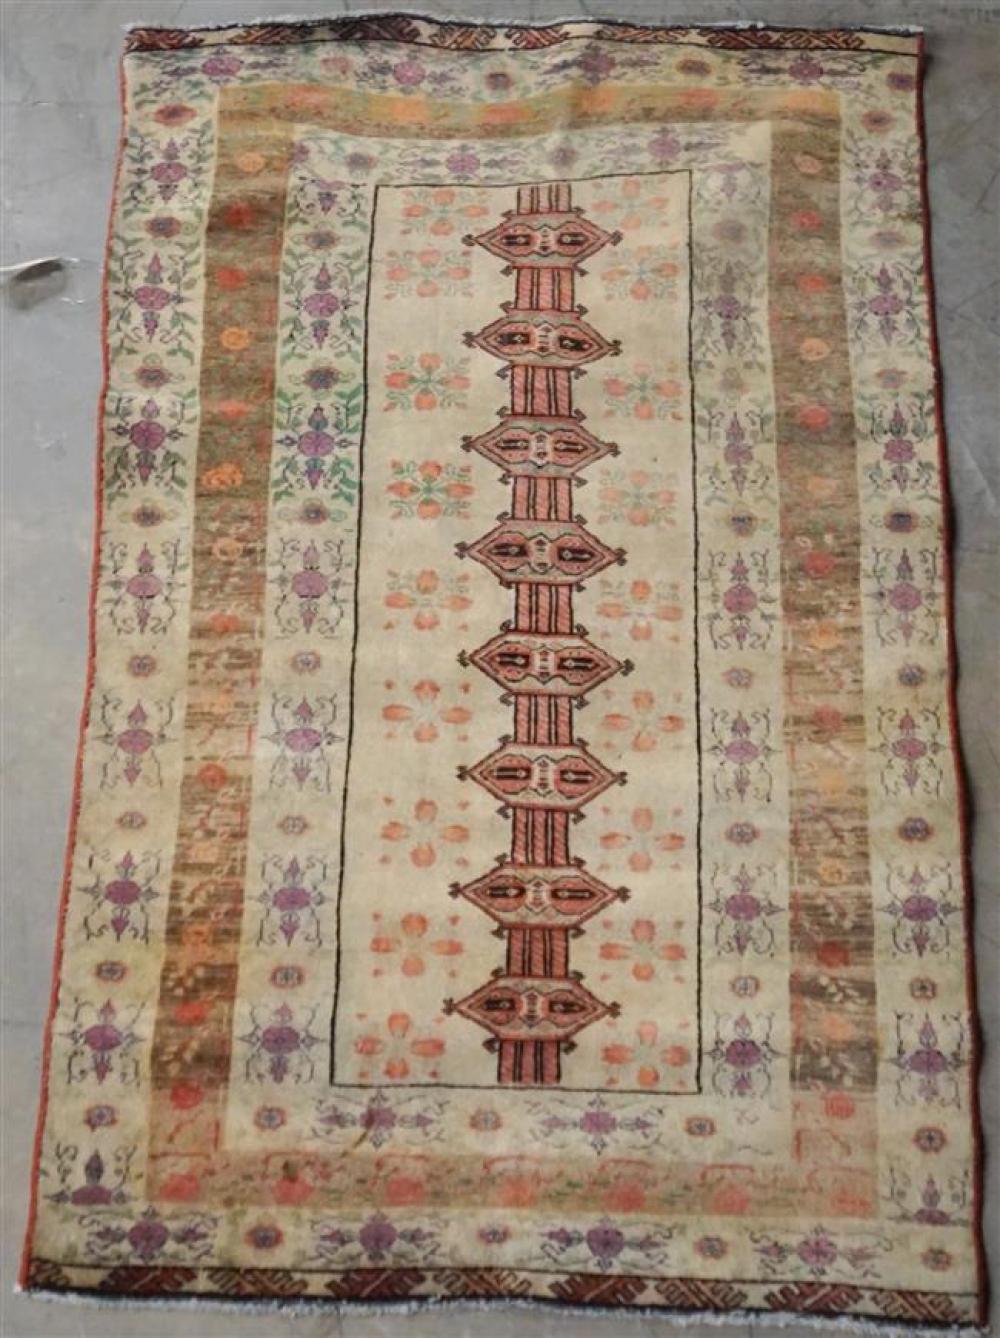 AGRA RUG 4 FT 4 IN X 2 FT 8 INAgra 323b5c